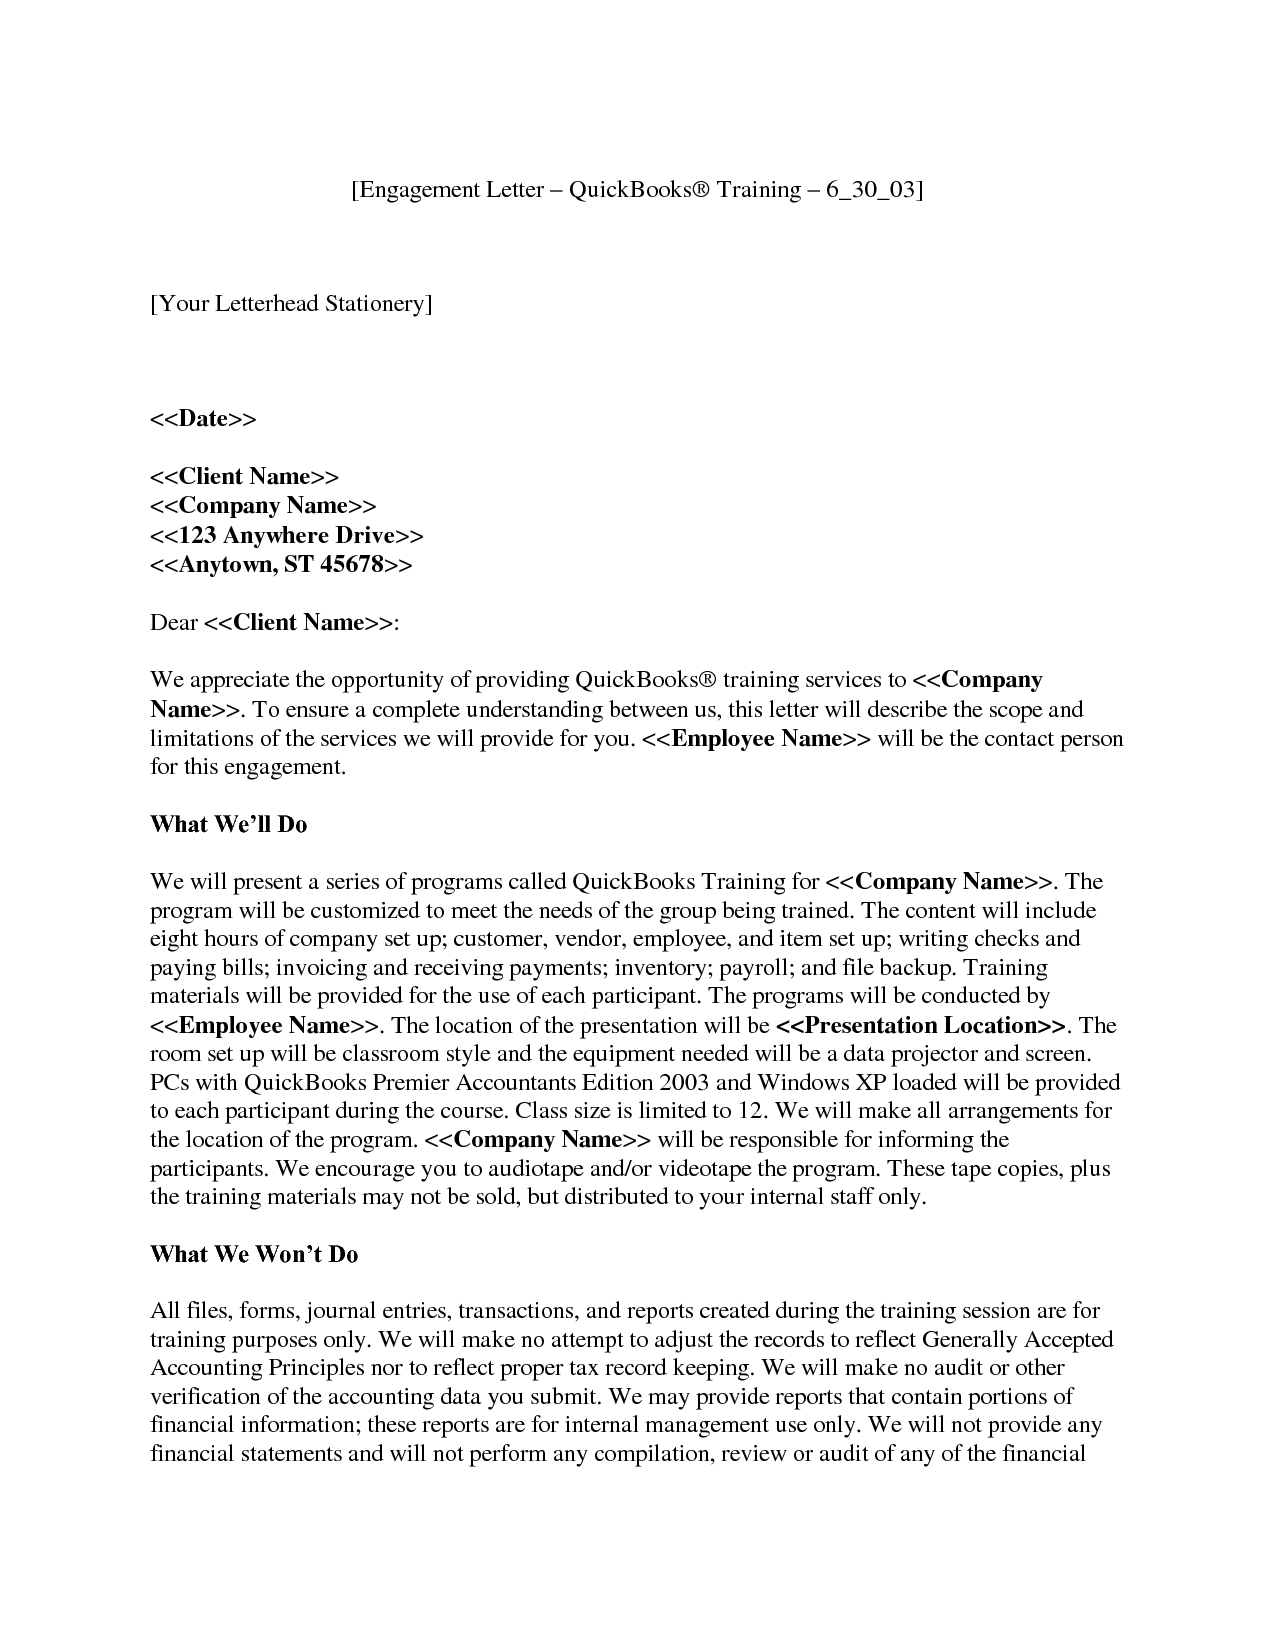 Tax Engagement Letter Template - How to Write A Letter Engagement Gallery Letter format formal